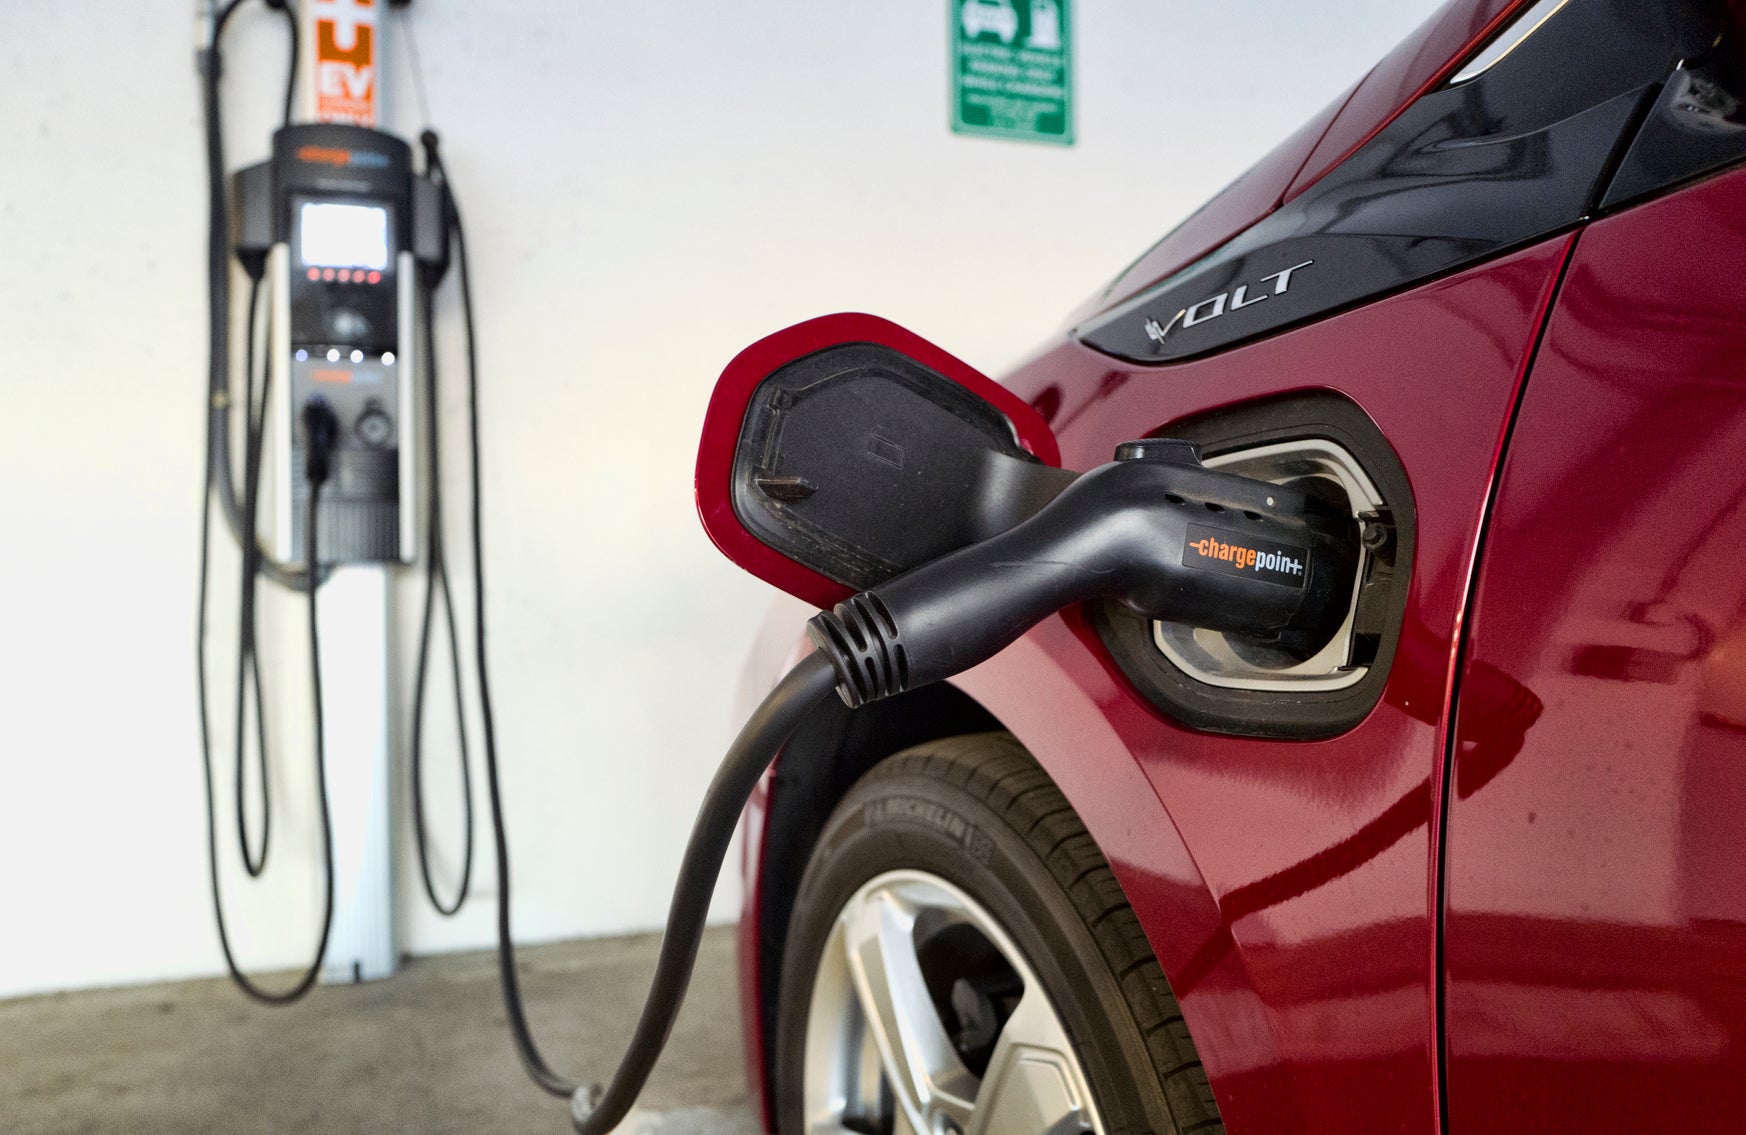 n-j-launches-5-000-rebate-for-electric-vehicles-purchases-whyy